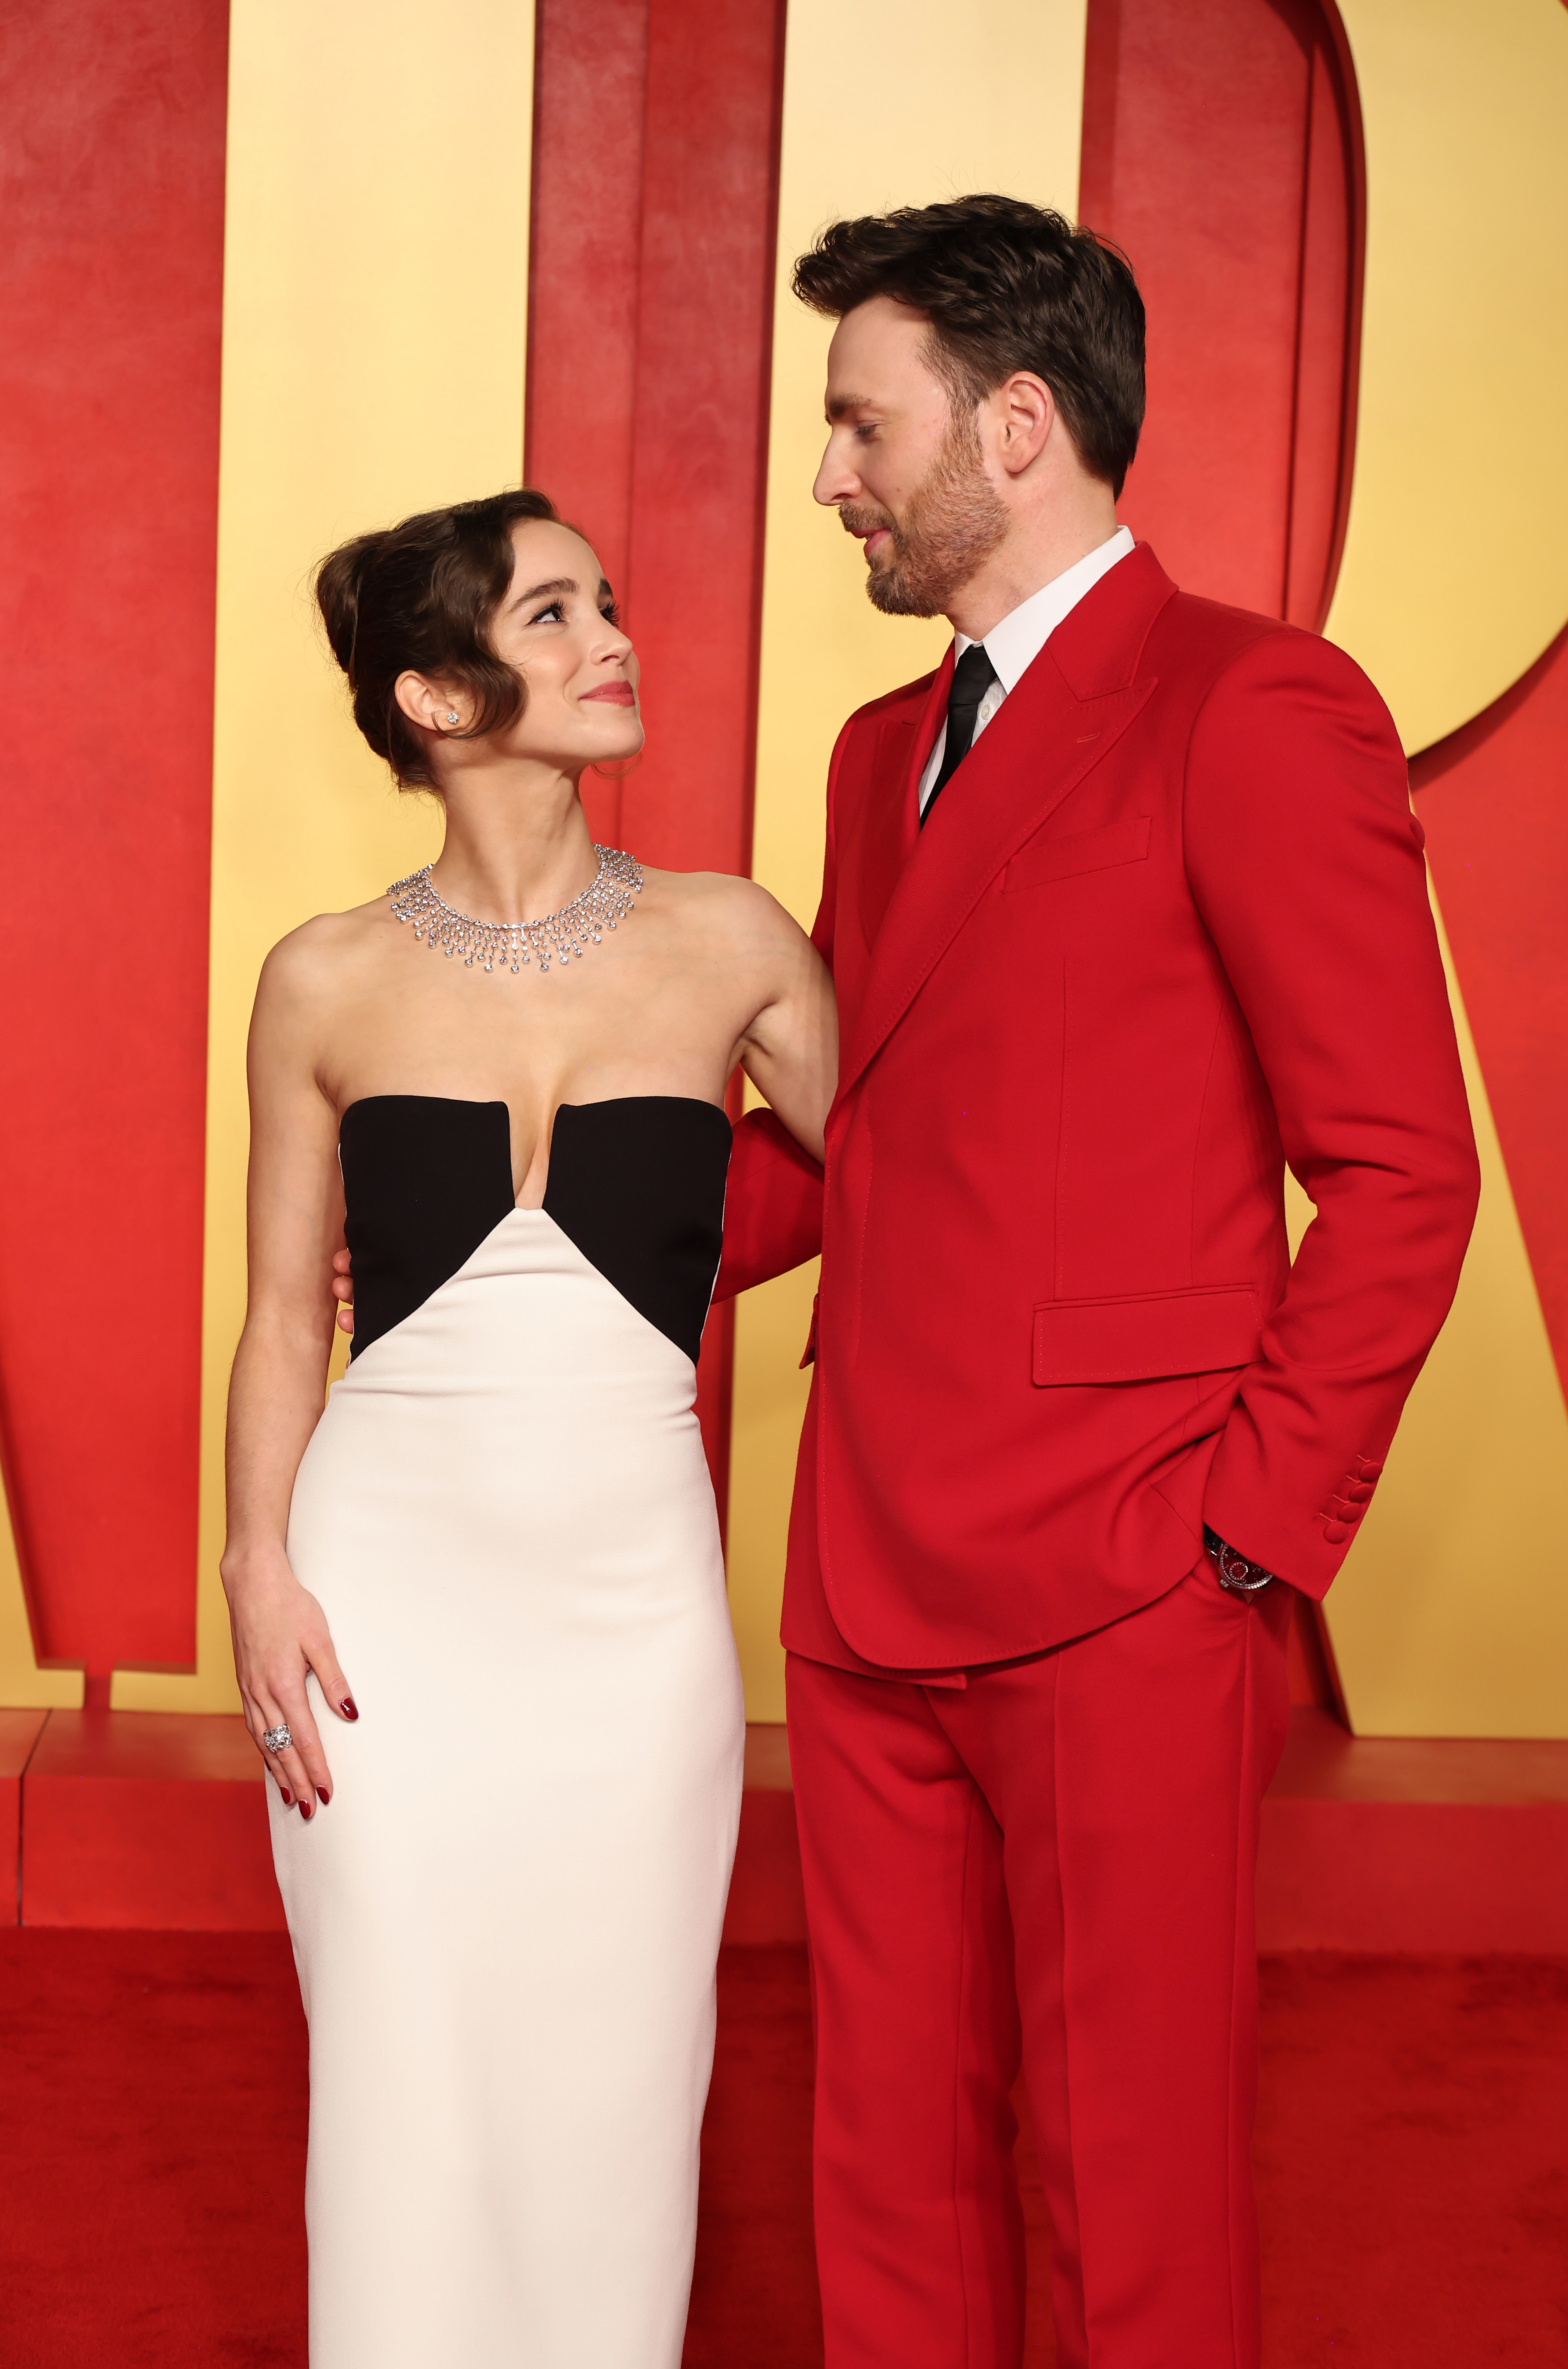 Alba in a white dress with a black top, Chris in a red suit, looking at each other